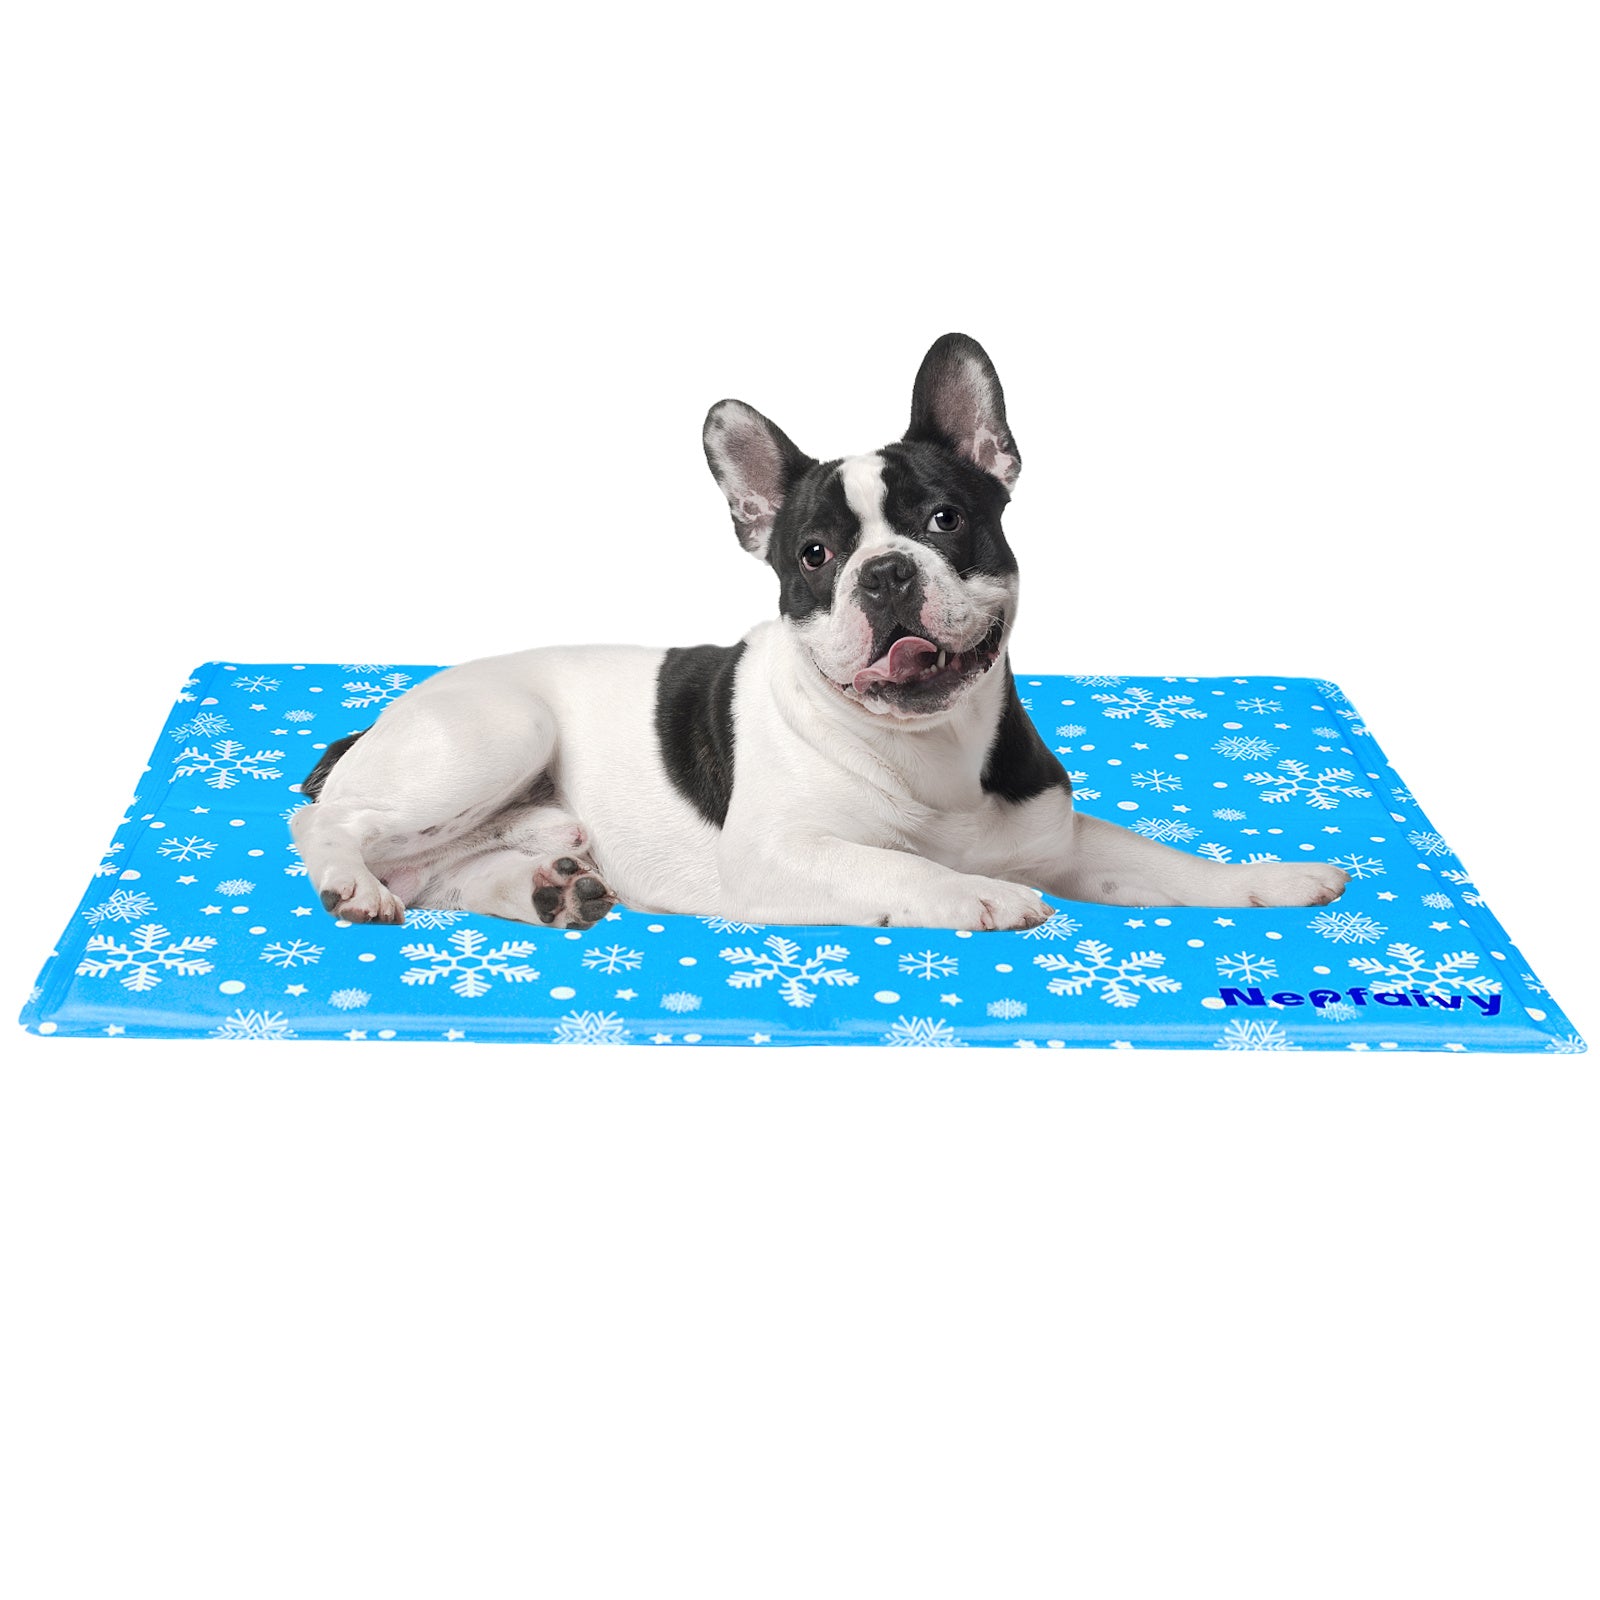 Dog Cooling Mats Small - Self Cooling Mat For Dogs And Cats, Non-toxic Gel Pet Cooling Mat, No Need To Refrigerate, Keep Pets Cool In Hot Summer For Indoor Outdoor, 50x40cm